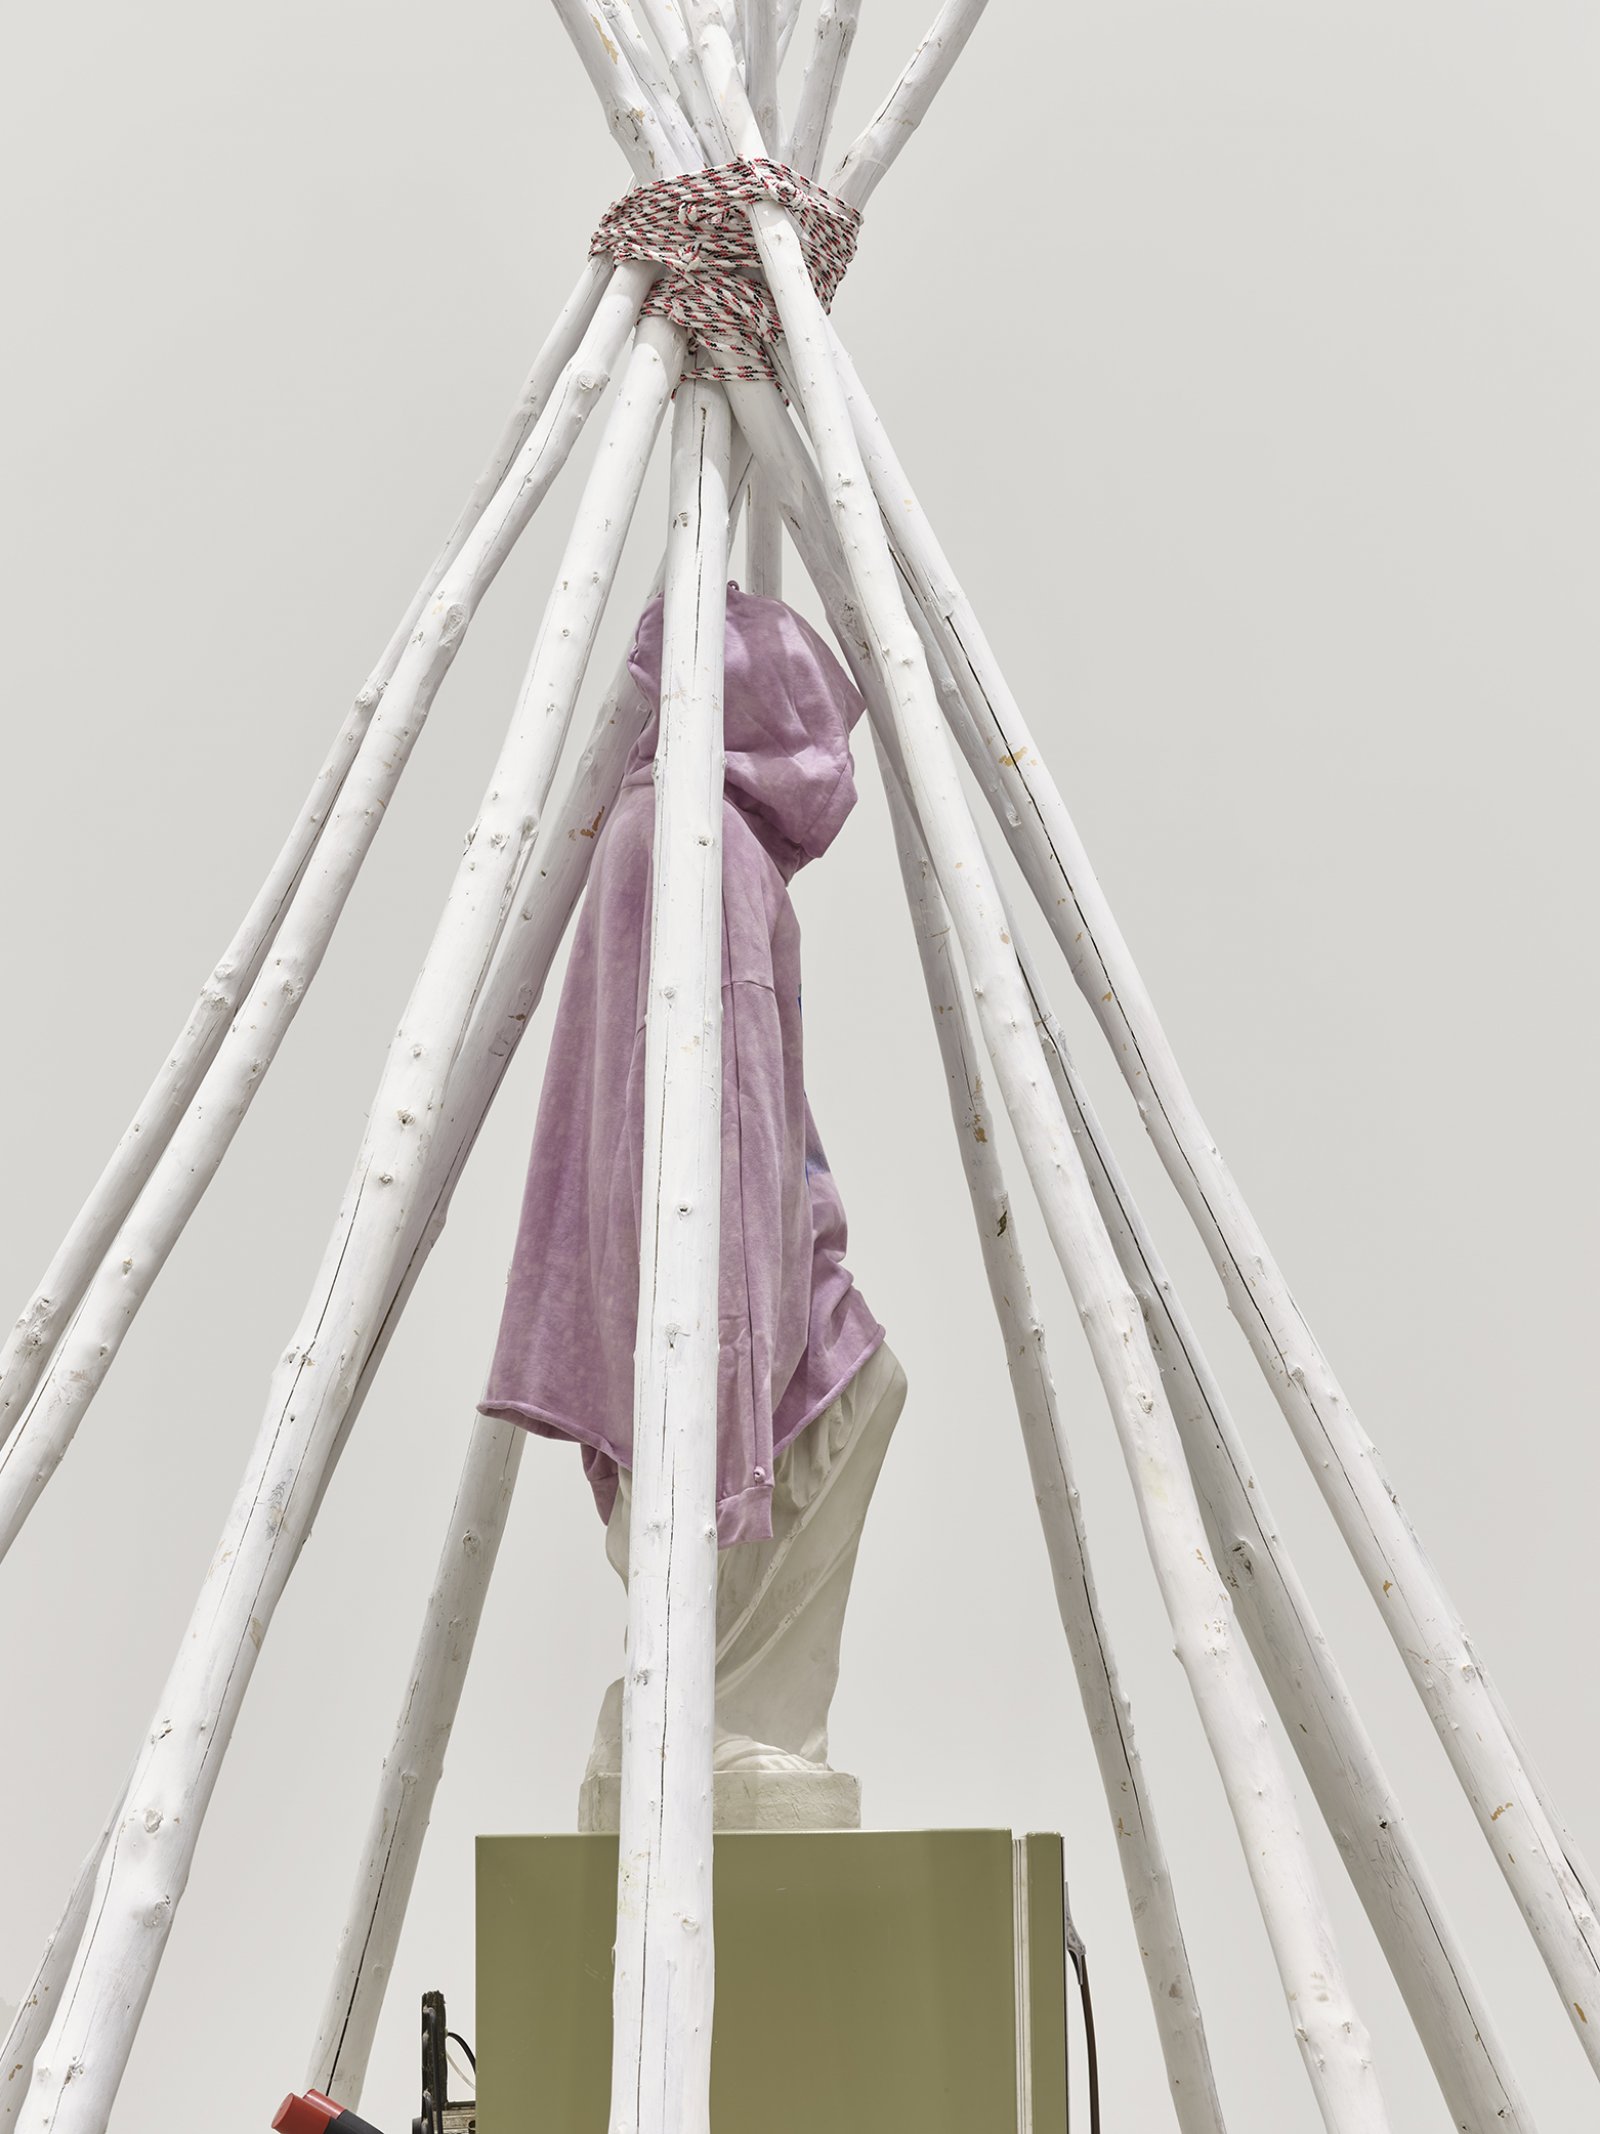 Duane Linklater, what grief conjures (detail), 2020, teepee poles, paint, nylon rope, wooden pallet, refrigerator, tie-down straps, hand truck, plastic statue, handmade hoodie, cochineal dye, silkscreen, 249 x 160 x 160 in. (632 x 406 x 406 cm)